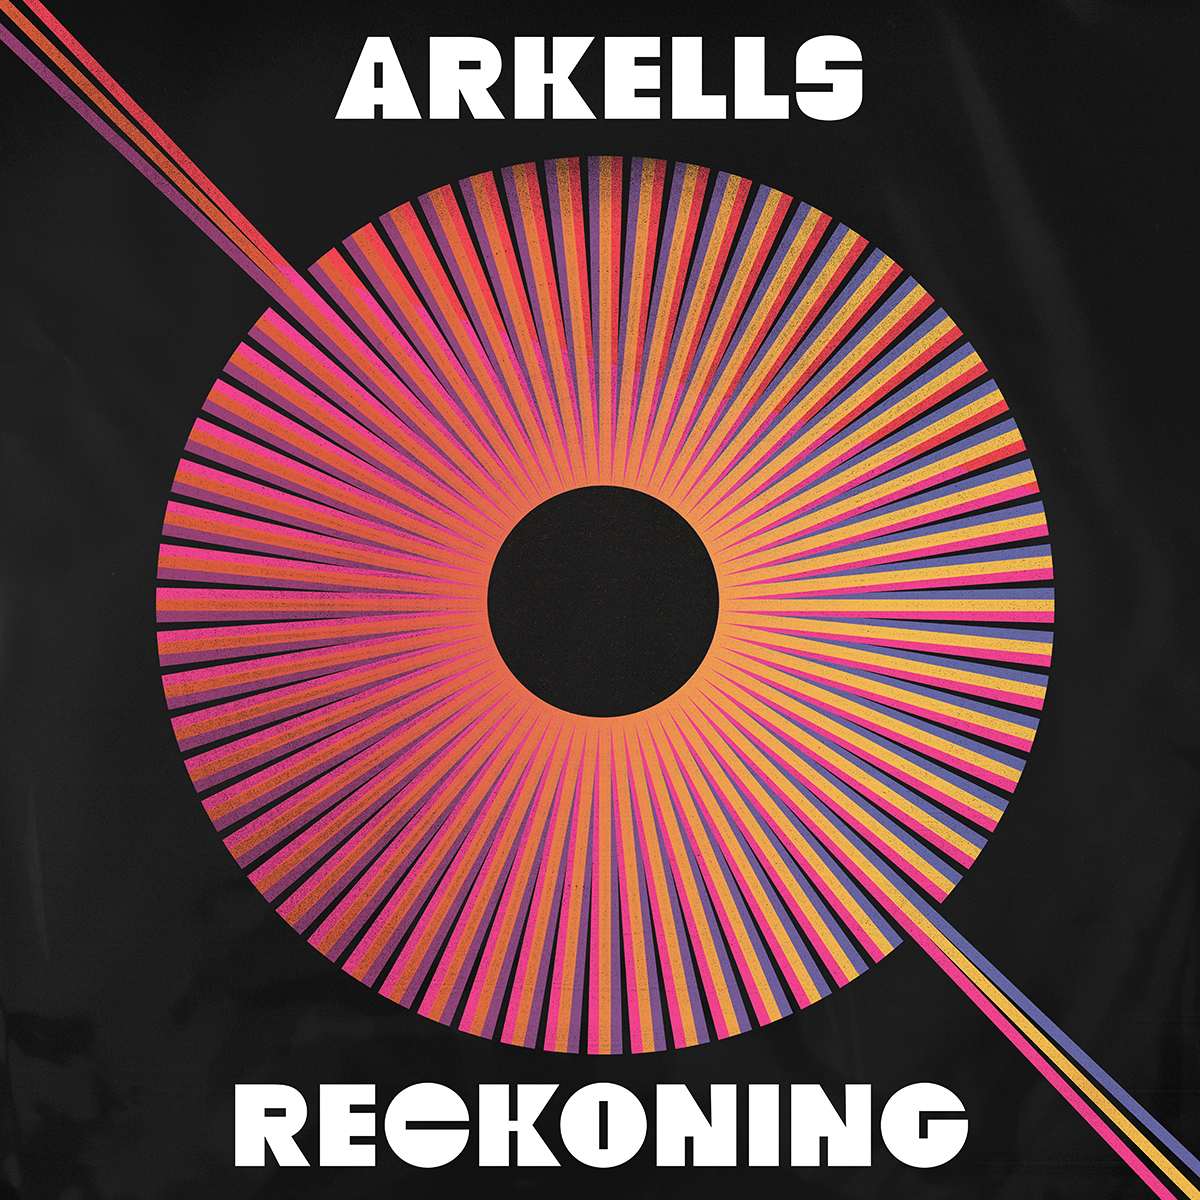 Arkells Launch 2022 With New Single “Reckoning” First Track From Upcoming Album Blink Twice